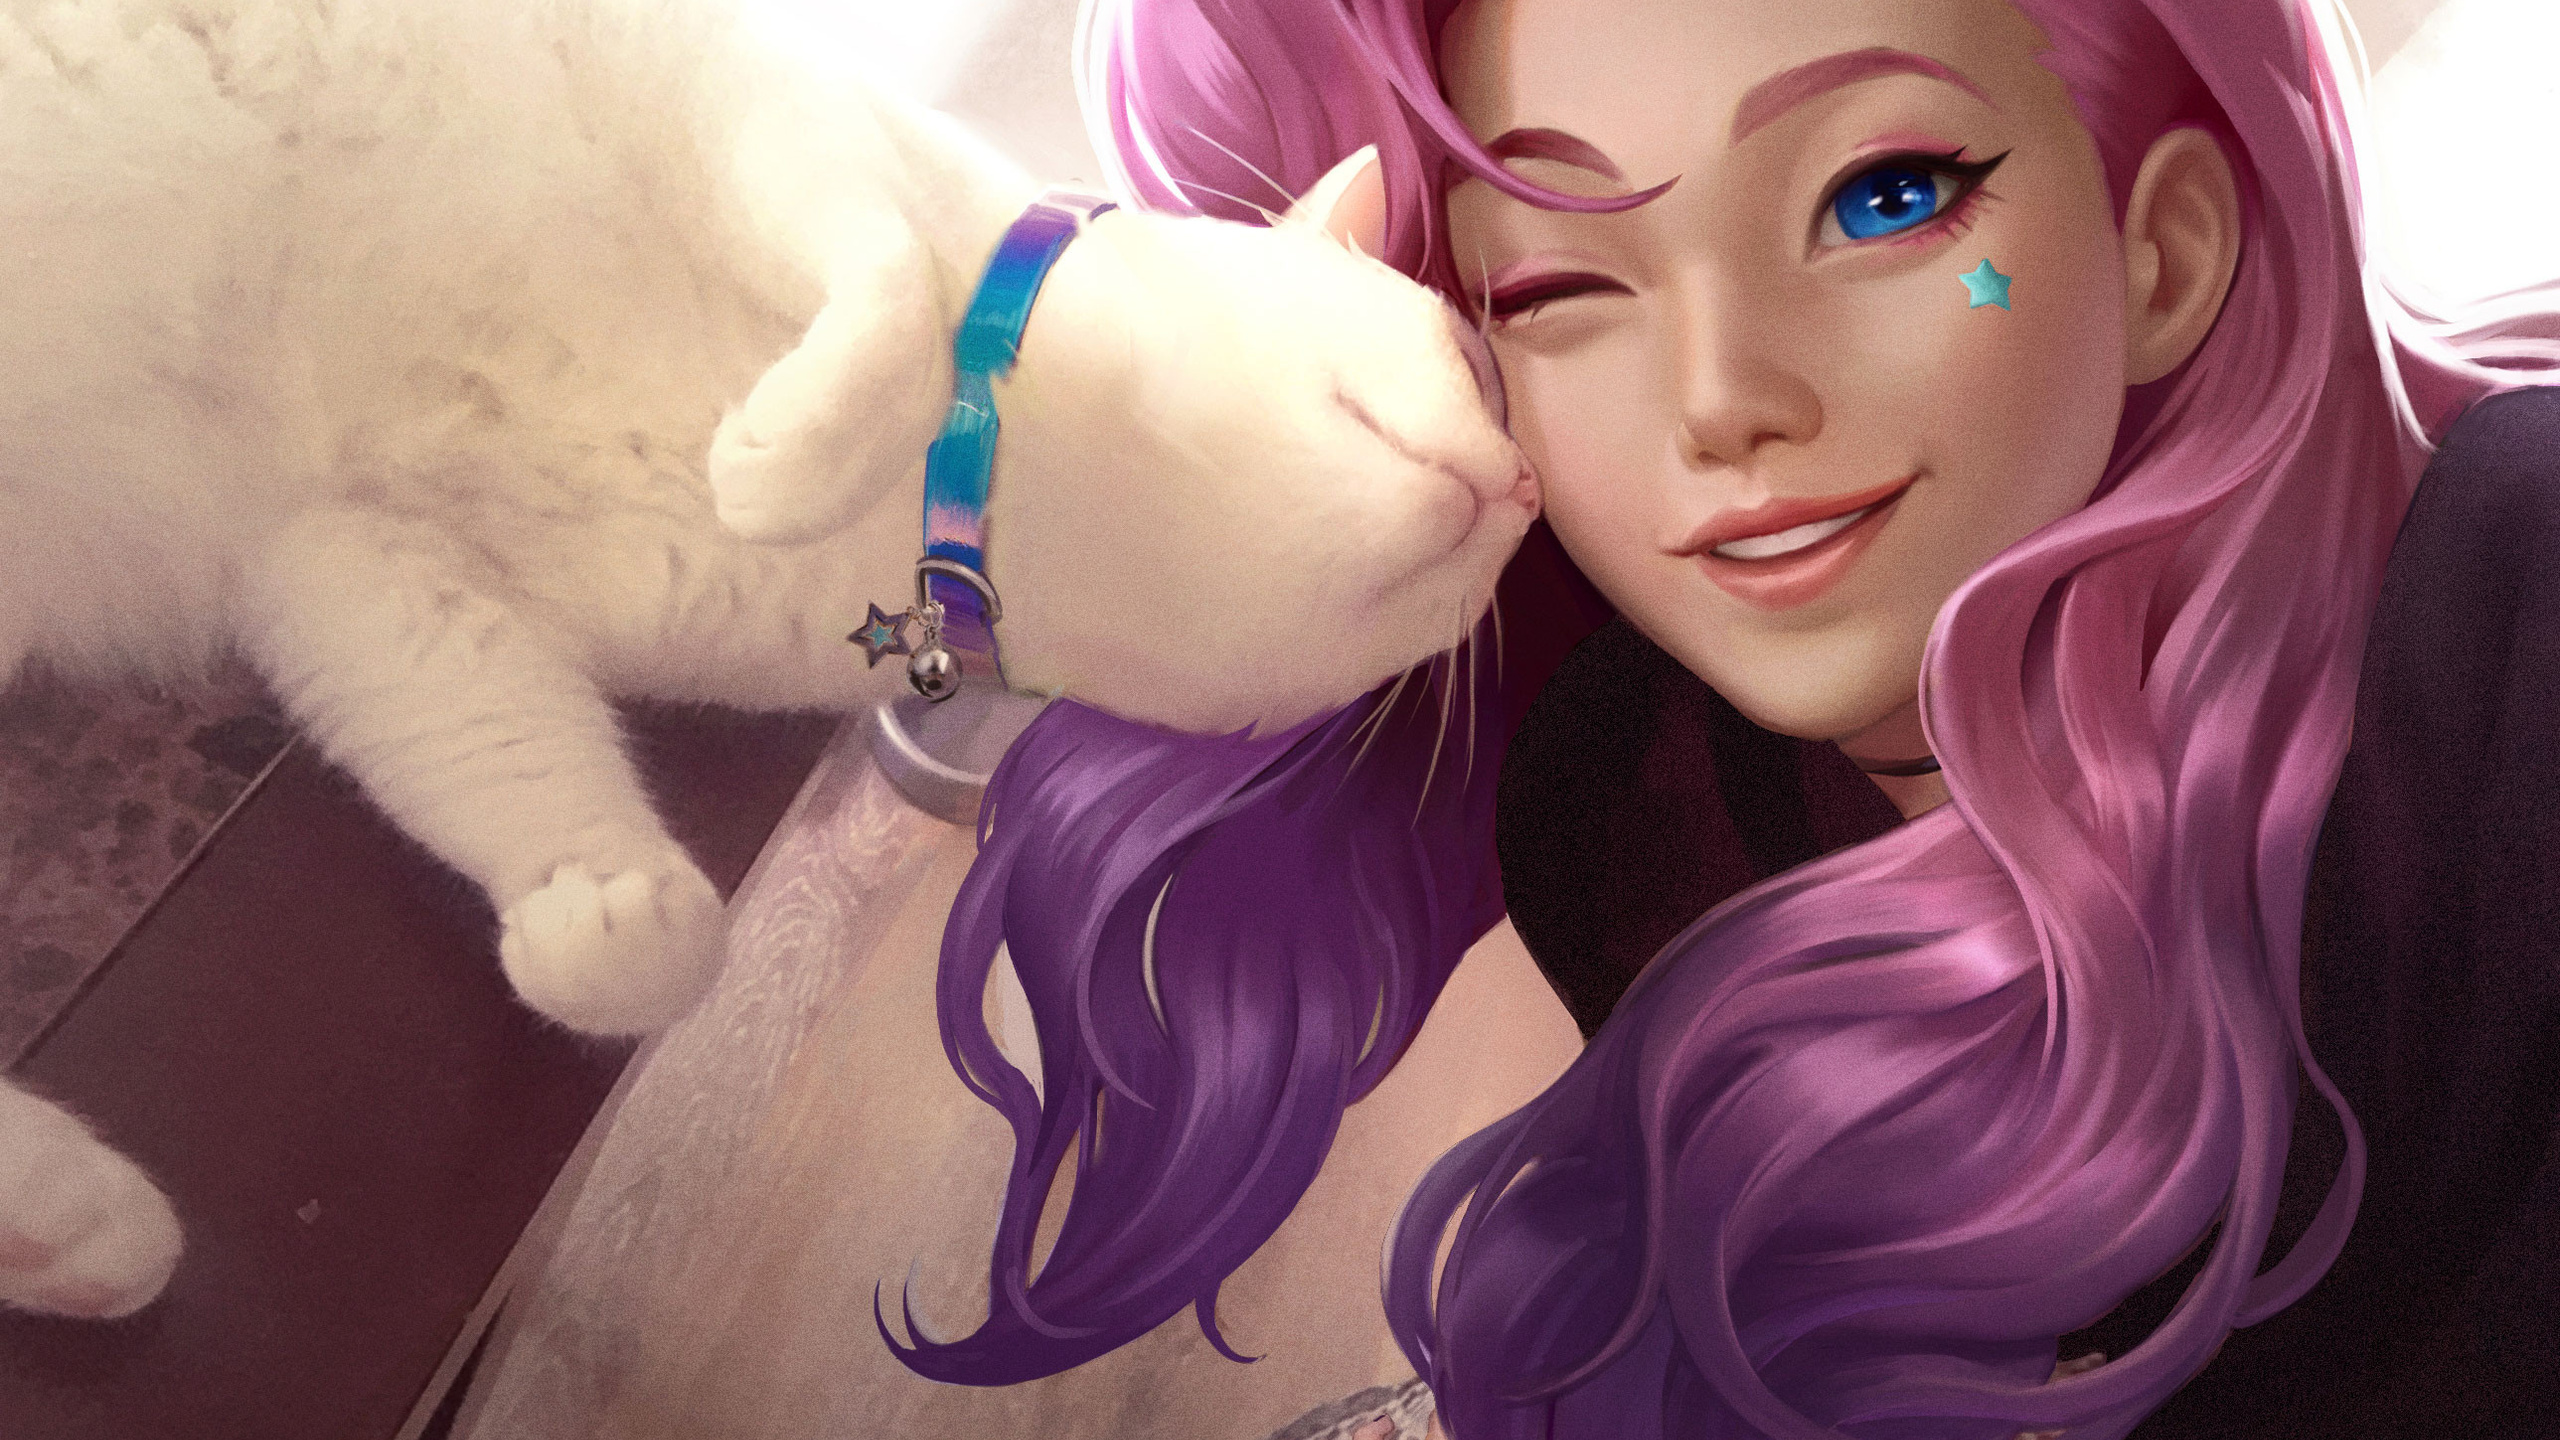 kudos productions, seraphine (league of legends), league of legends, kda seraphine, women, purple hair, blue eyes, cat, kda, fictional character, fan art, video games, video game girls, digital art, white cats